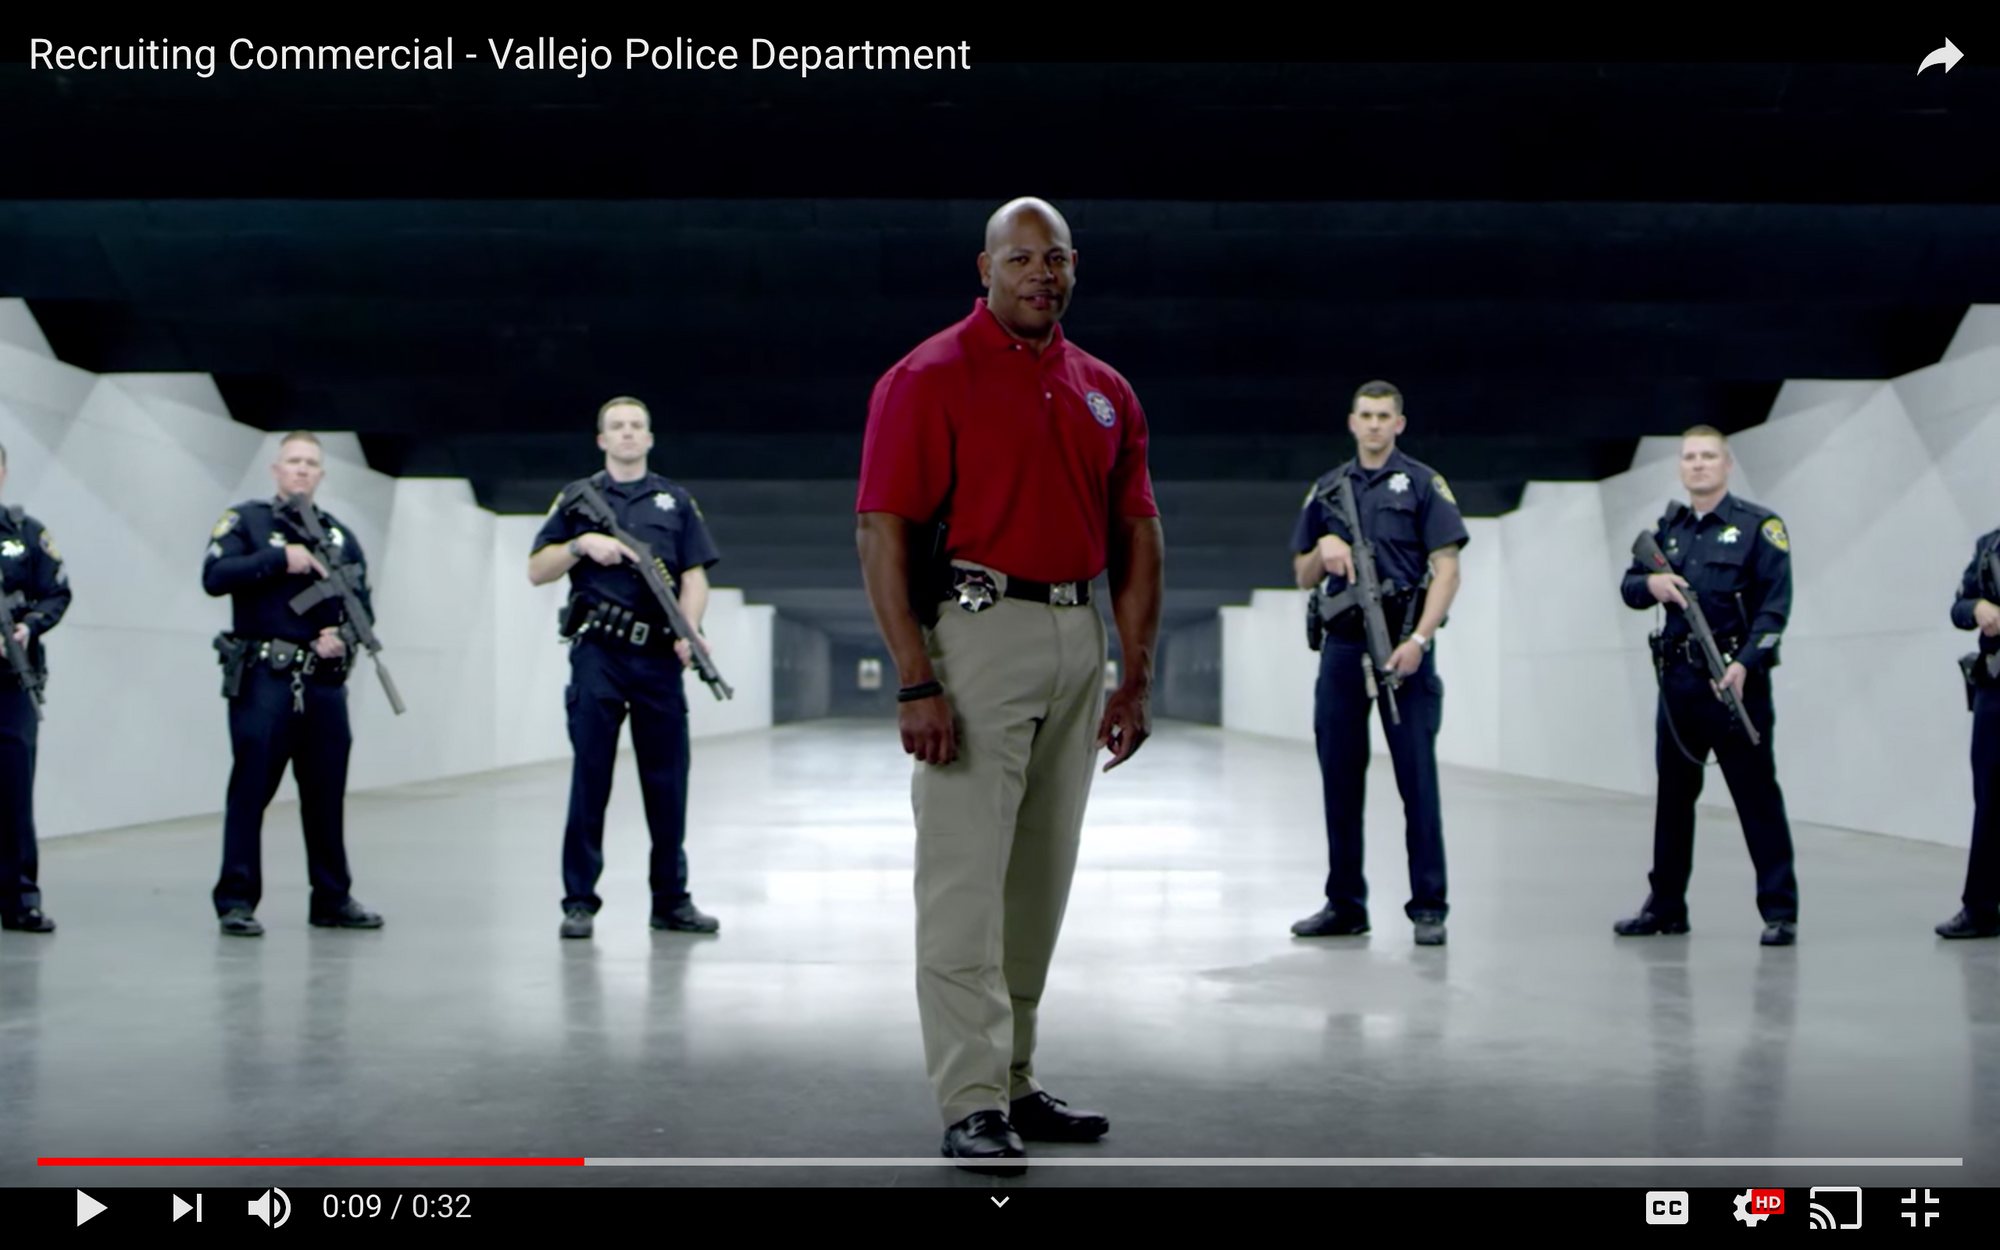 A police officer in a red polo shirt stands in the center of a room flanked by three officers in uniform on each side of him, all with guns in their hands.